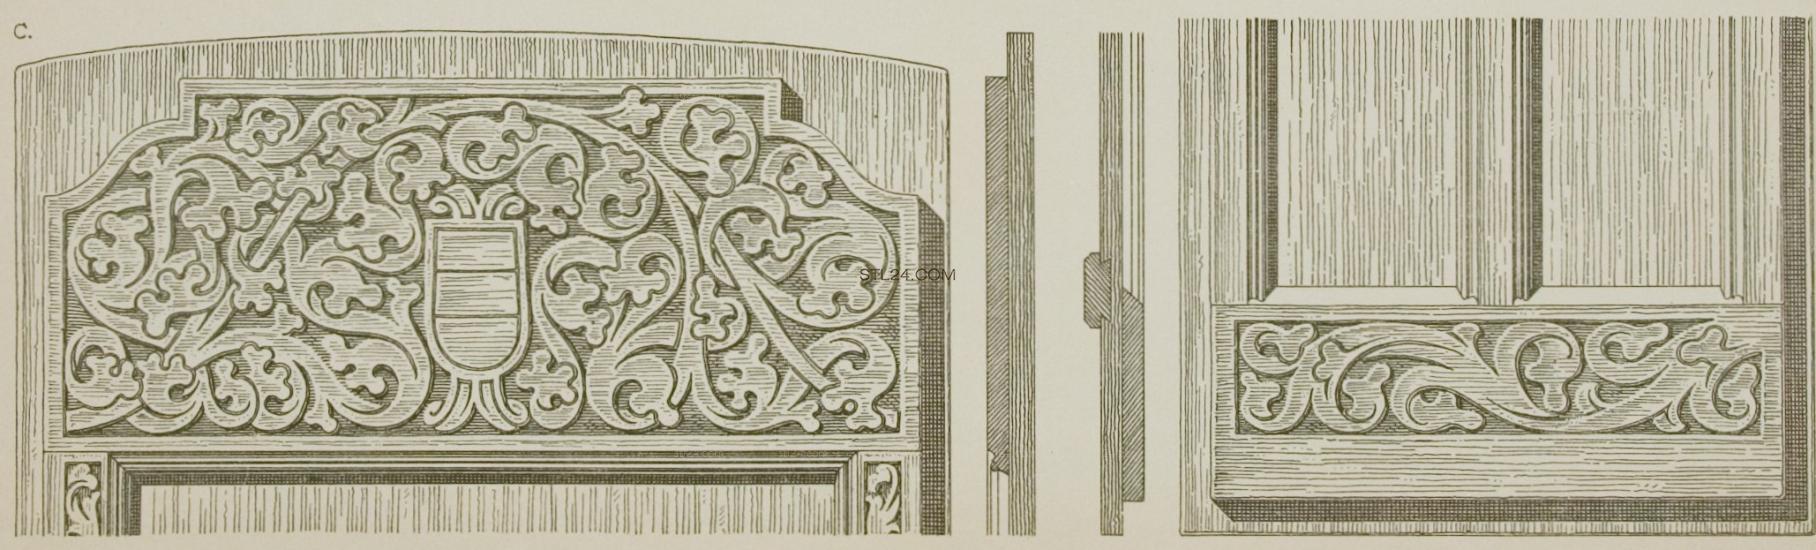 CARVED PANEL_1902